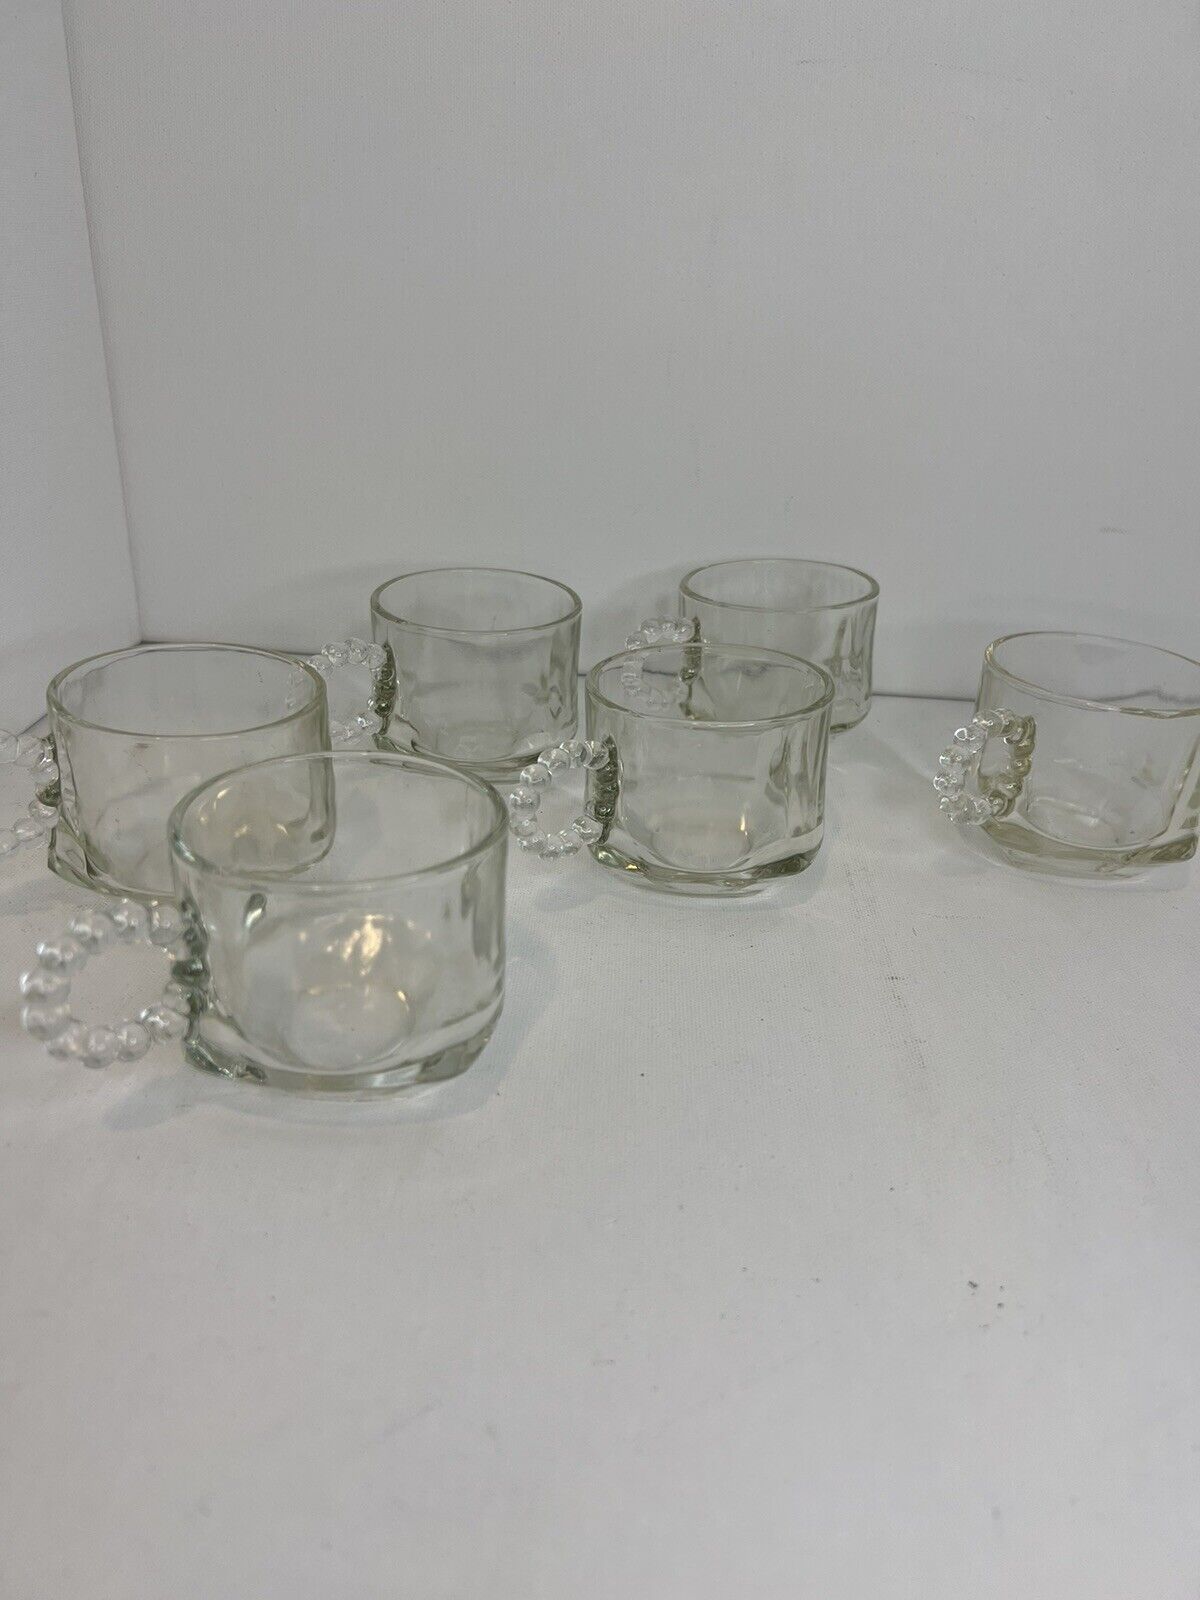 Vintage Hazel Atlas Orchard Punch Bowl Cups Square Bottom Clear Glass Lot Of 6